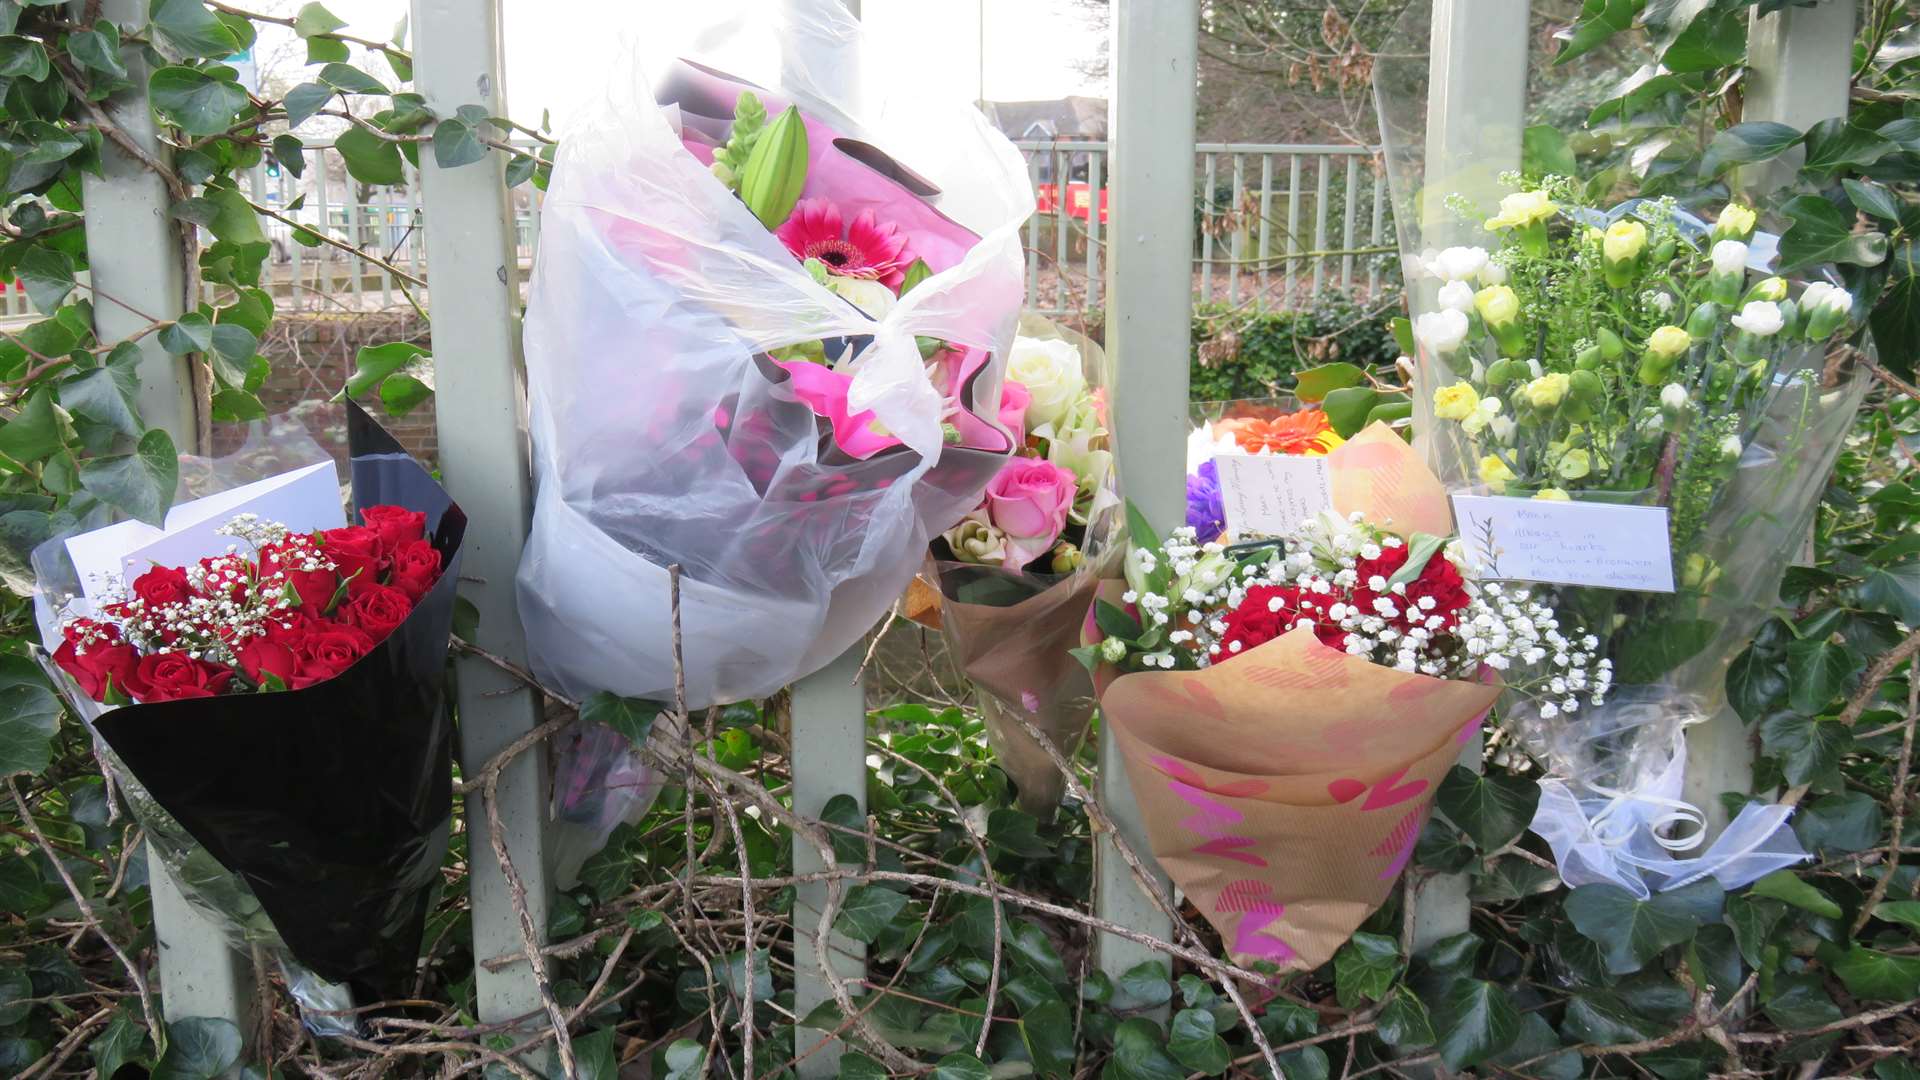 Tributes for Ashford man Mark Worsfold have been left at the scene